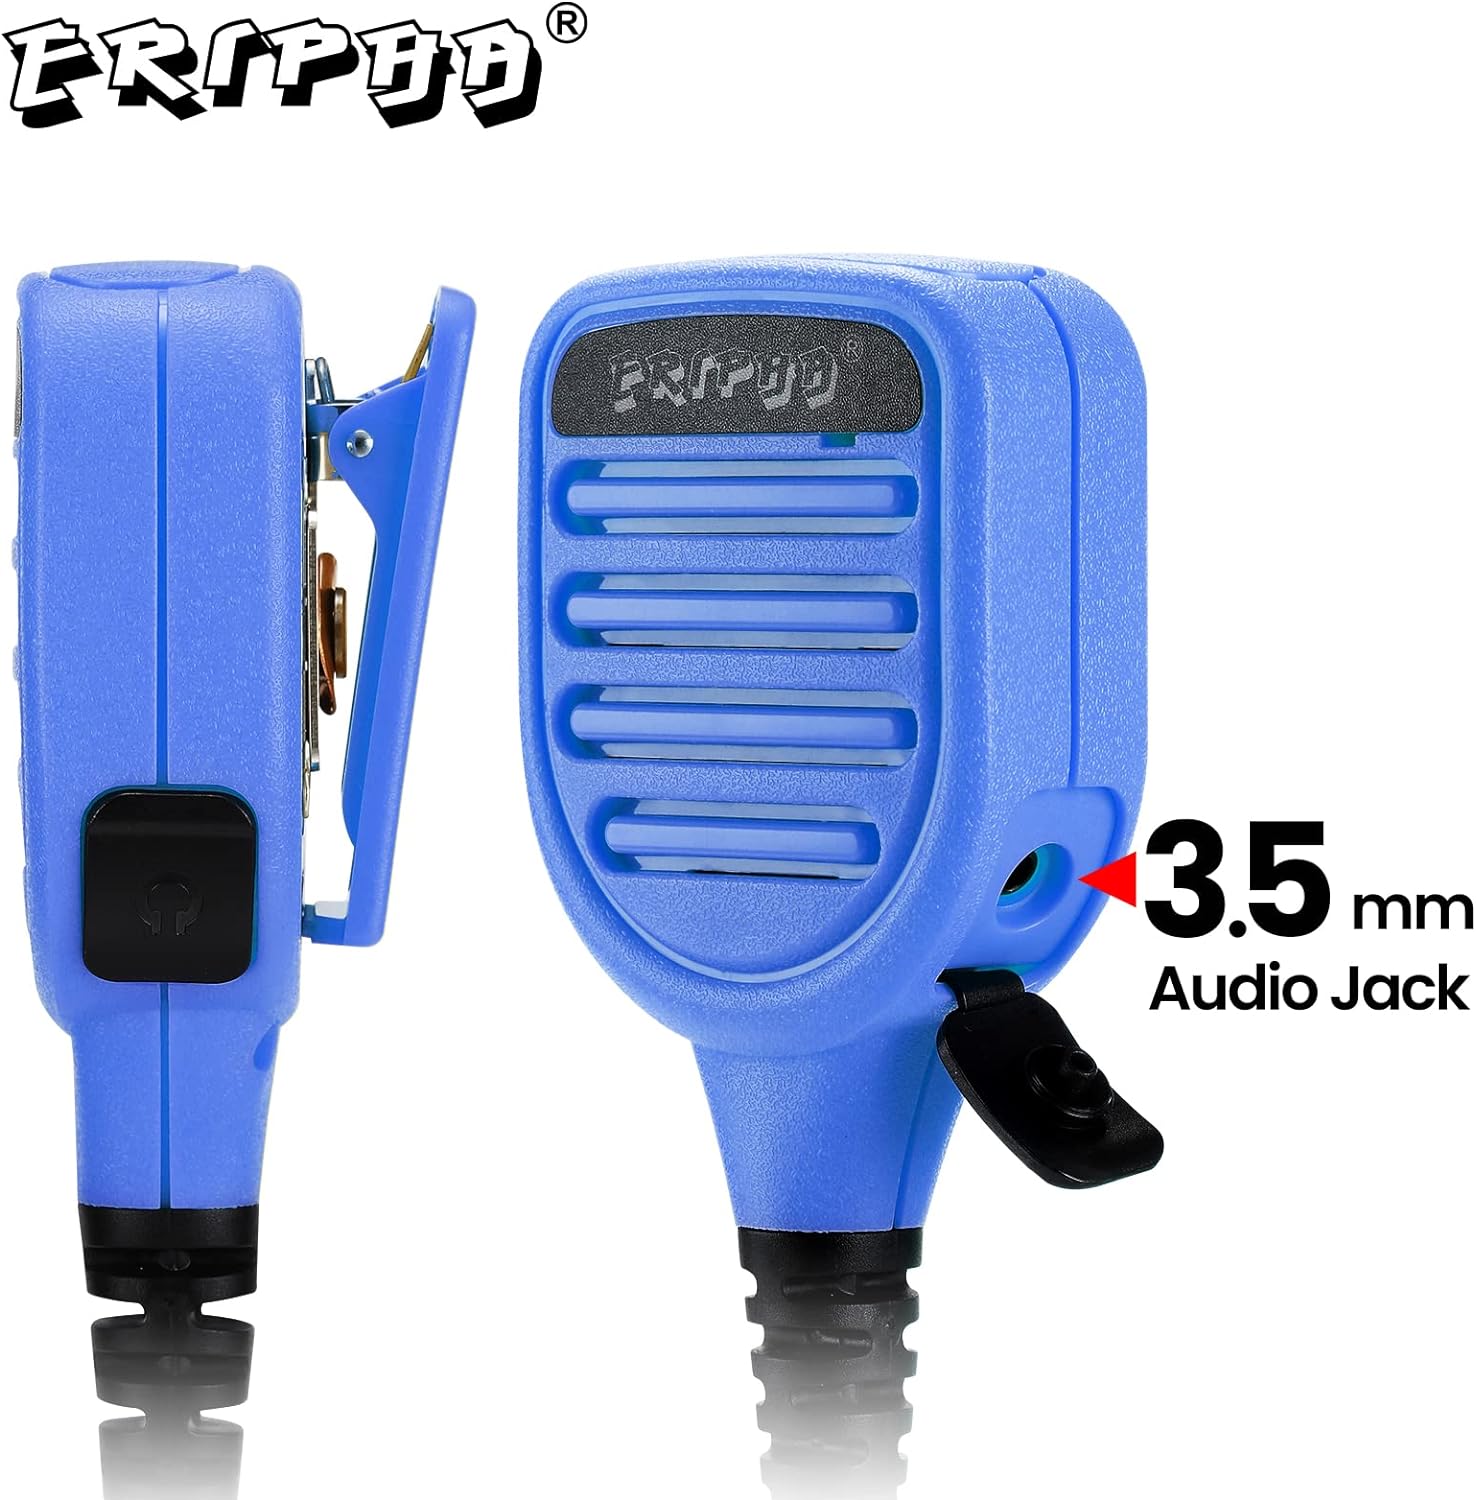 ERIPHA Shoulder Mic Speaker Compatible with Motorola XPR 3000 3000e 3300 3300e 3500 3500e Waterproof IP56 Two Way Radio Speaker Microphone with 3.5mm Jack (Blue)